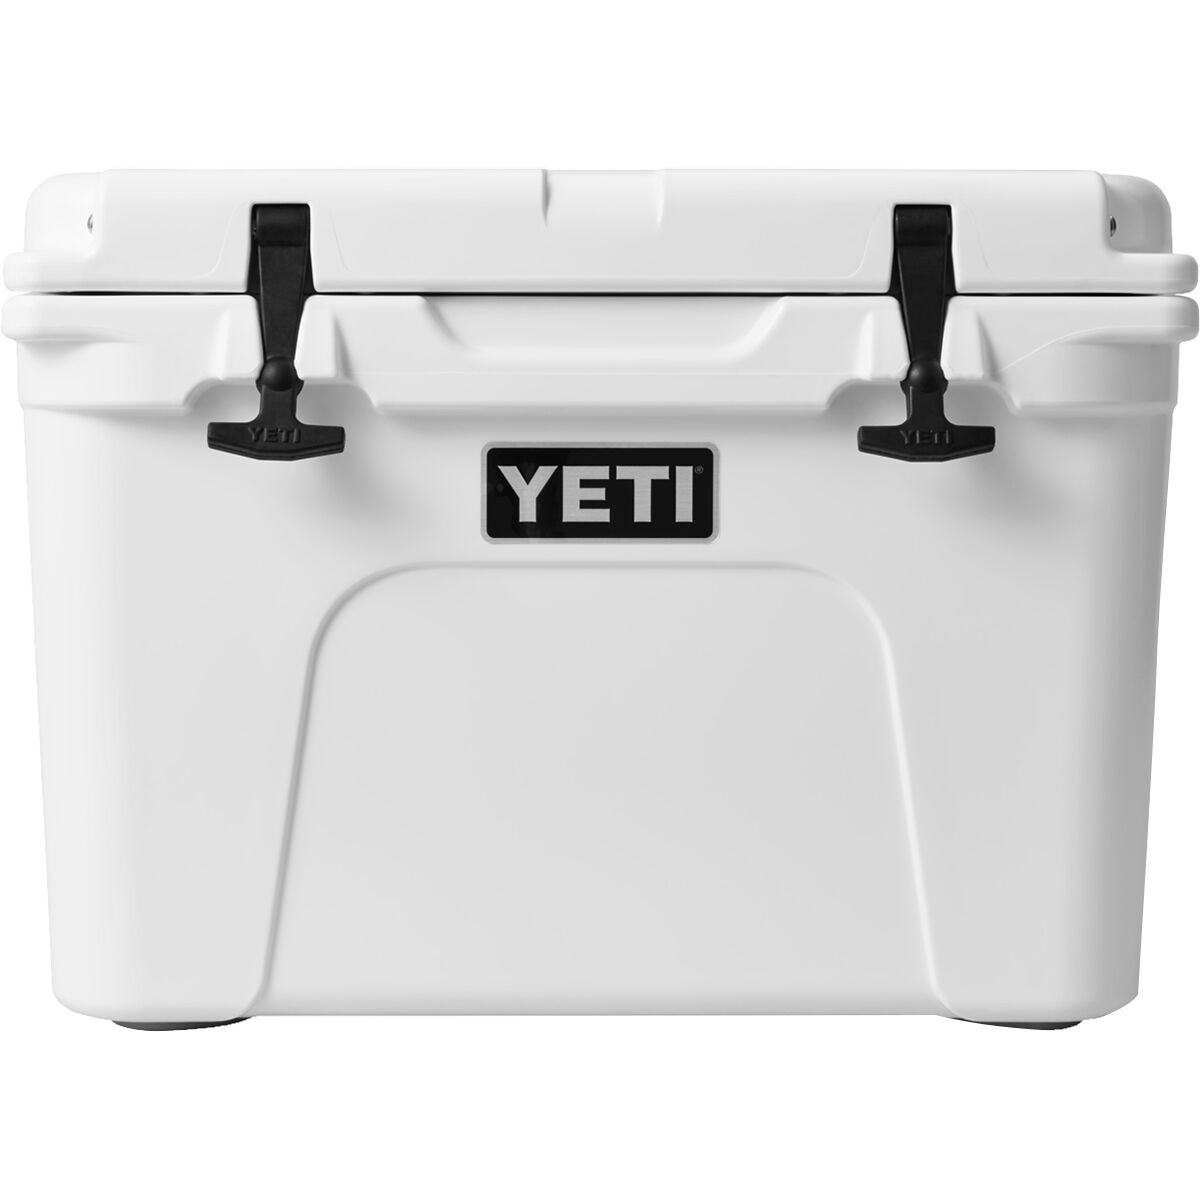 s Bestselling Yeti Mug Is Just $21 for Cyber Monday 2023